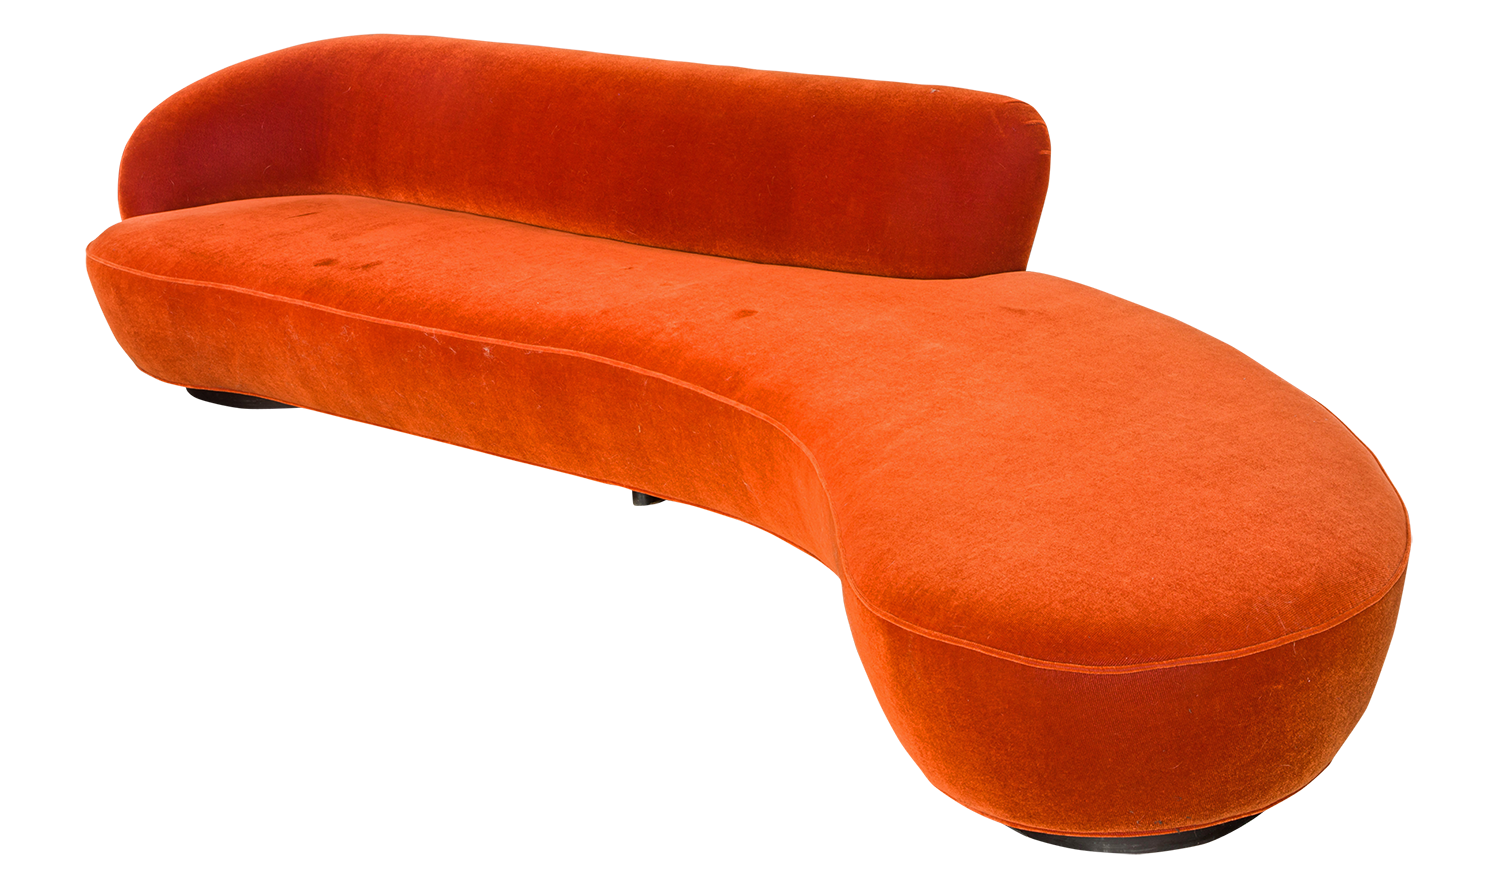 Vladimir Kagan Couture Sloane II sofa.To be offered at our Fall Modern + Contemporary Art + Design Sale